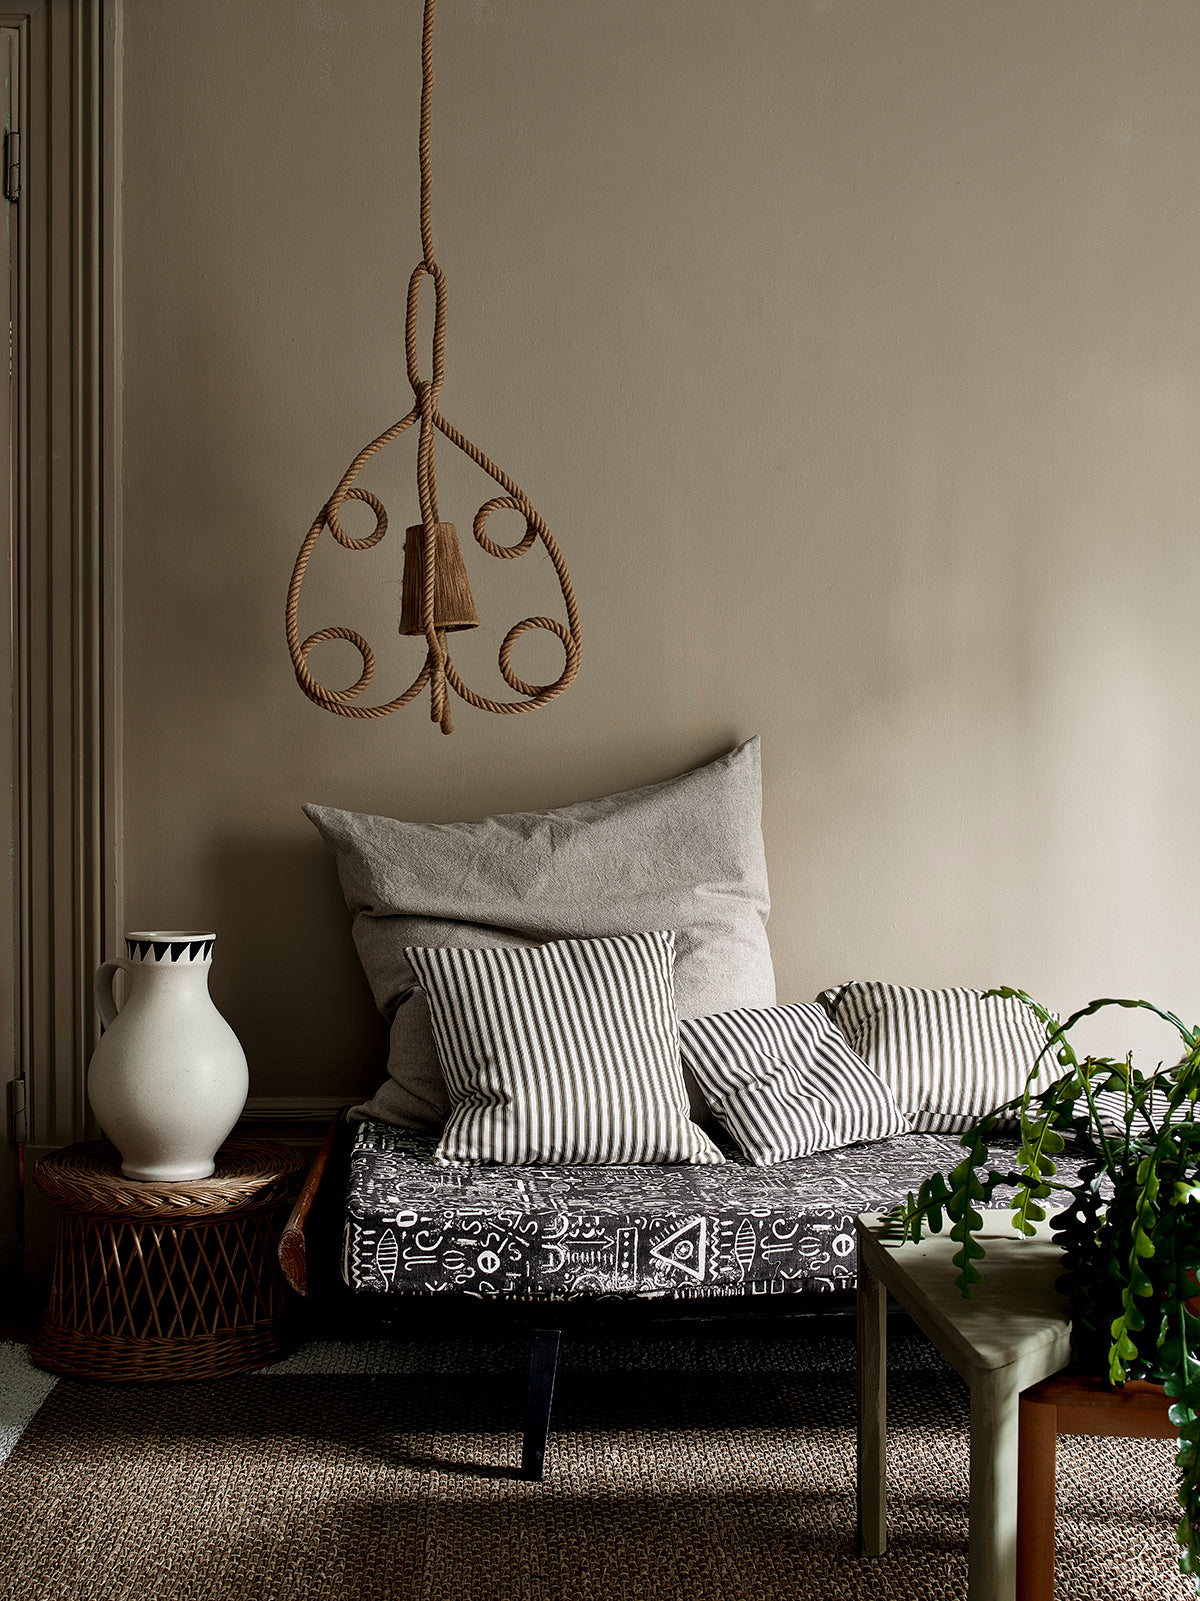 Annie Sloan Wall Paint® French Linen